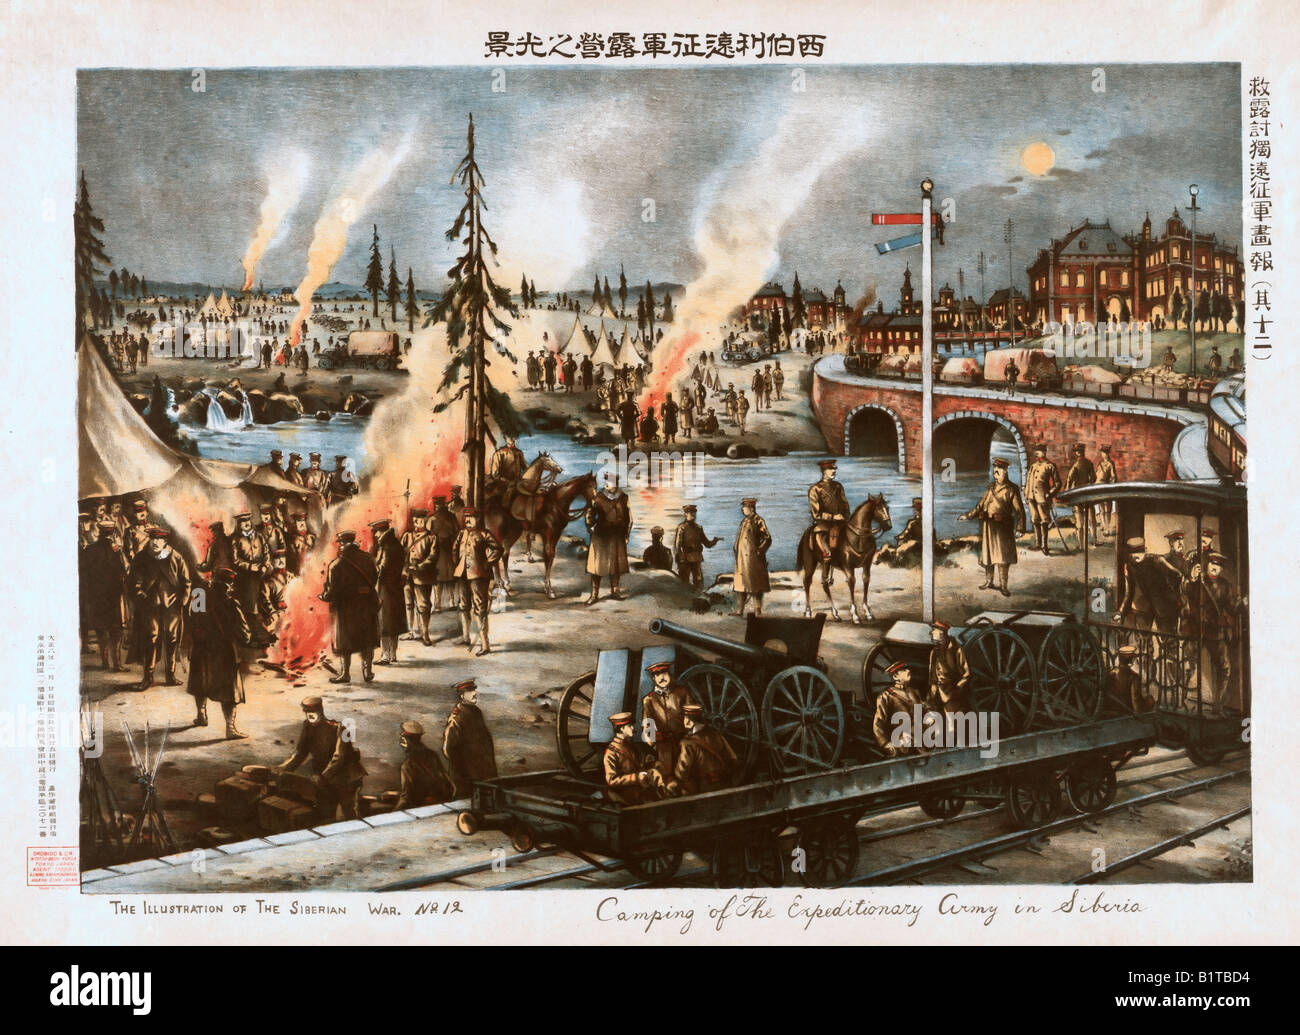 Japanese Print - Camping of the Expeditionary Army in Siberia during the Siberian War Stock Photo